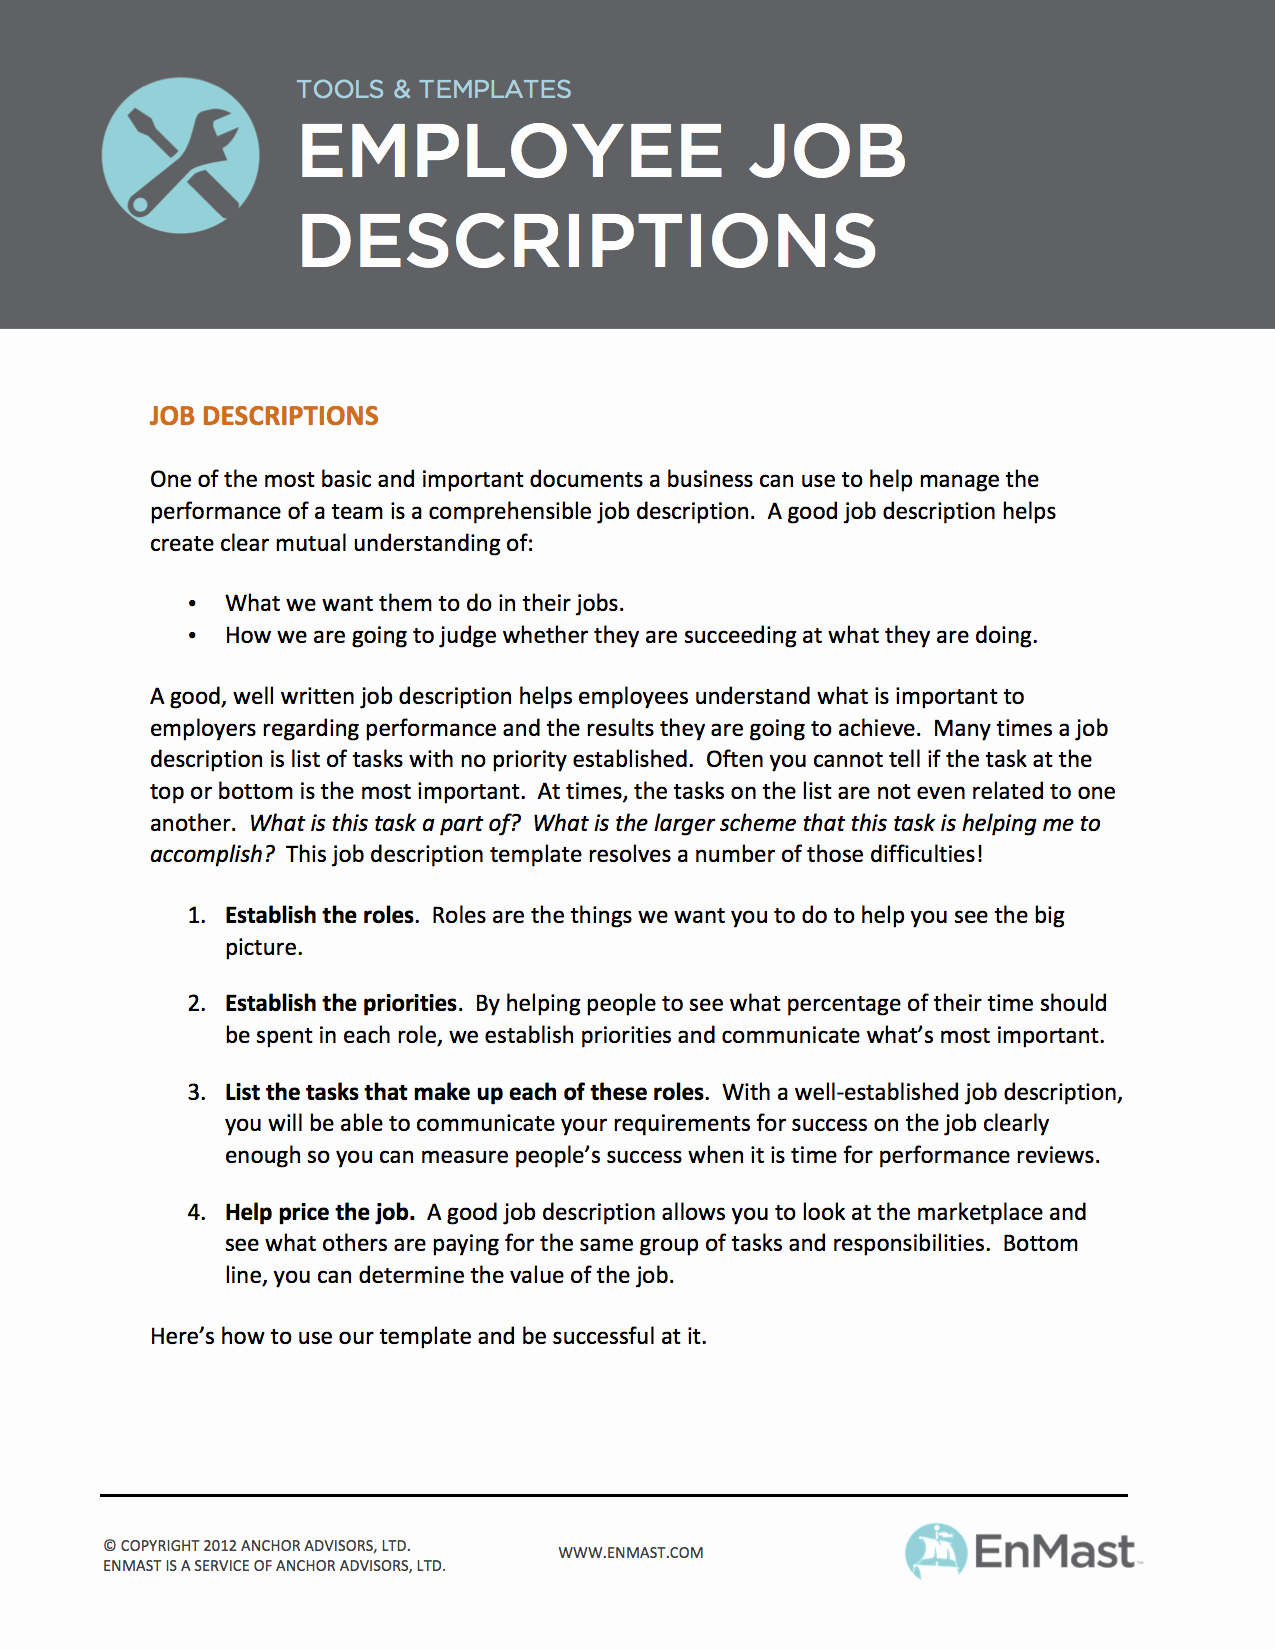 Employee Duties and Responsibilities Template Inspirational Small Business tools